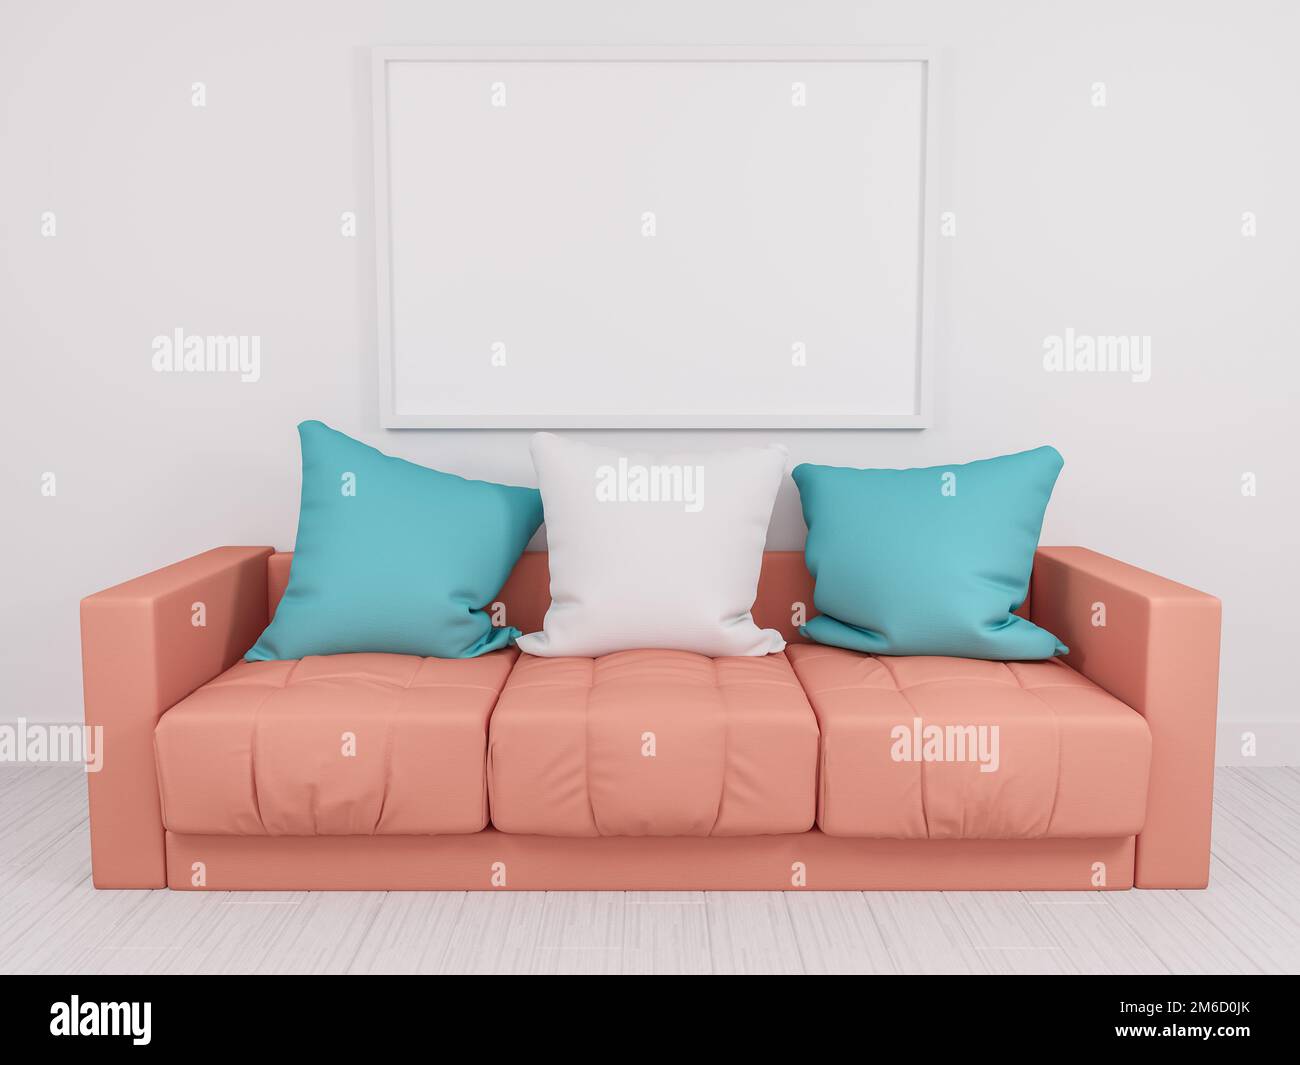 Modern sofa in an interior room view Stock Photo